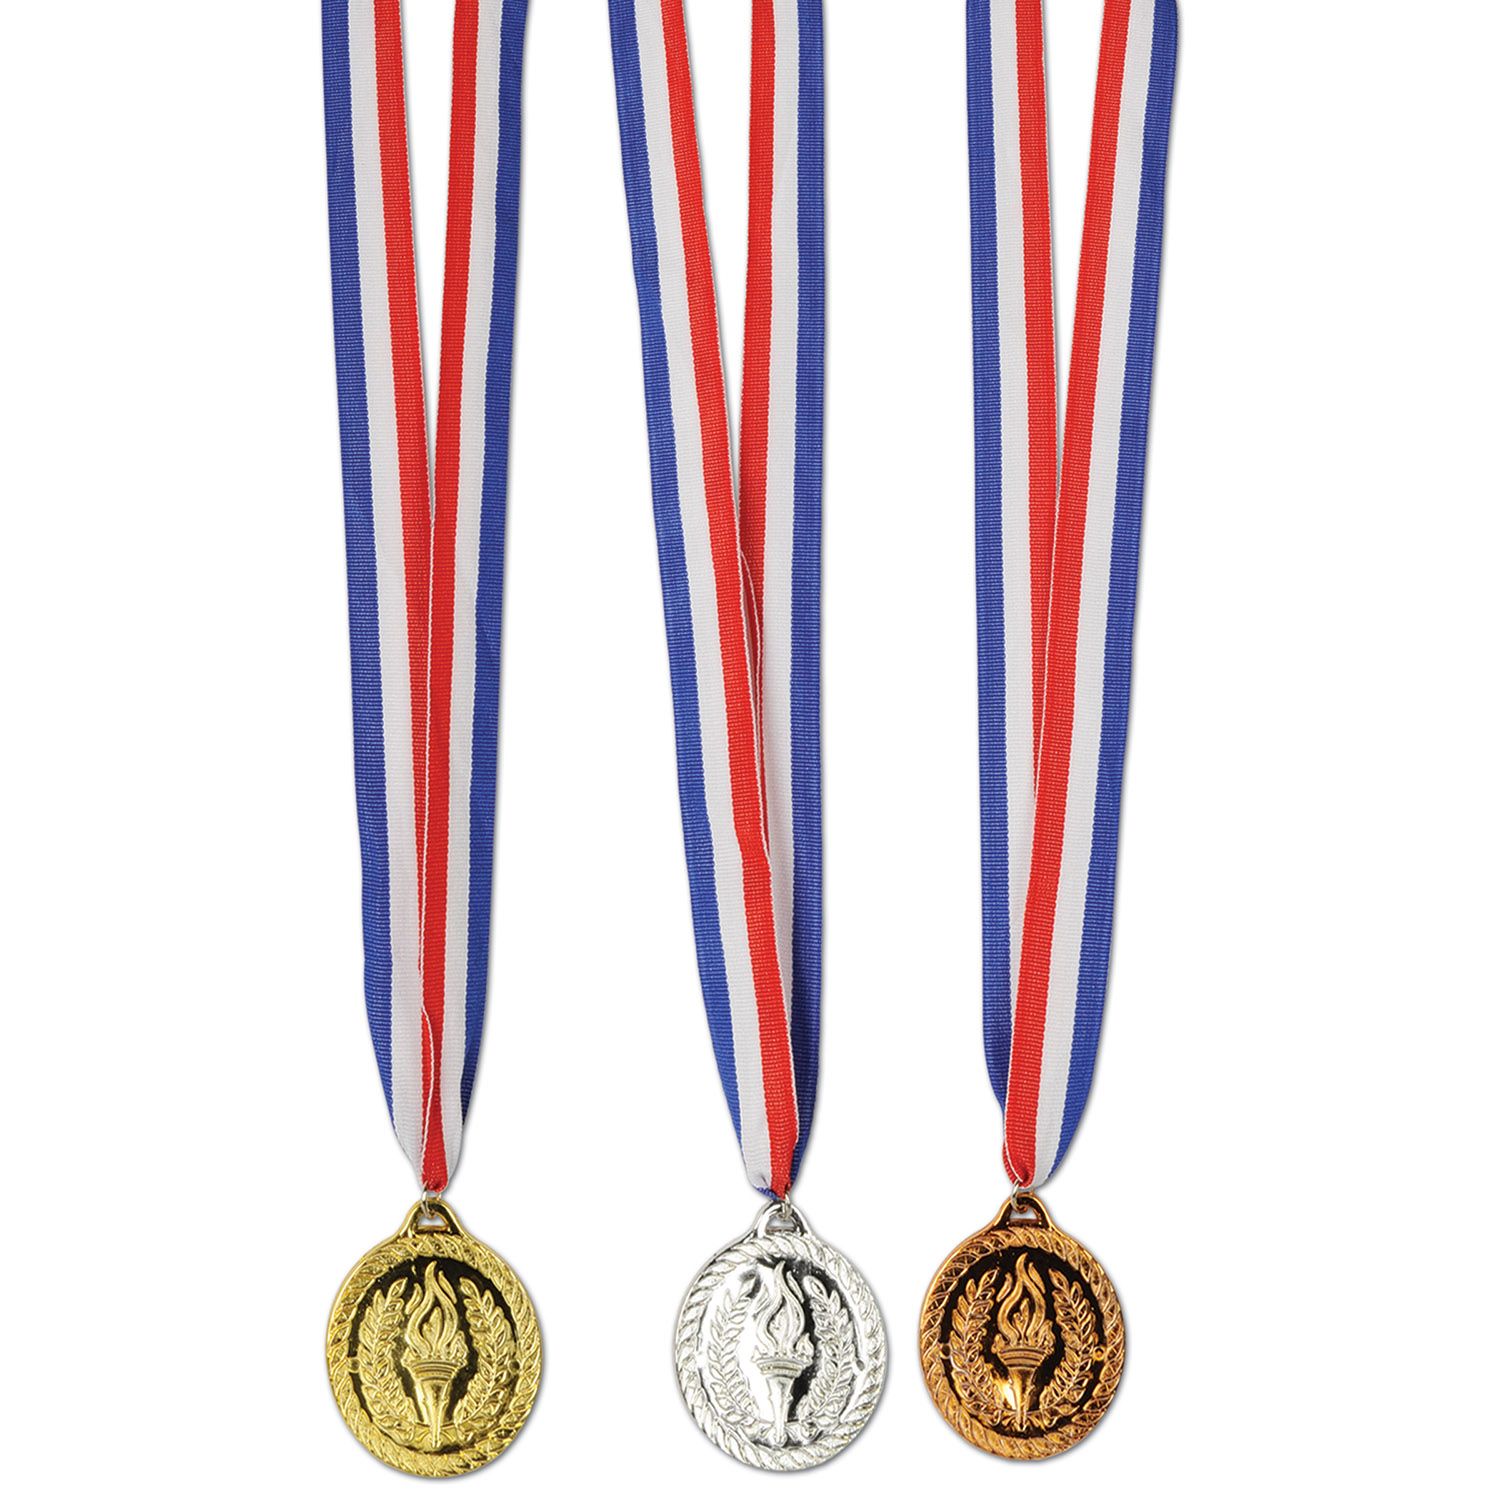 Beistle Gold Medal with Ribbon